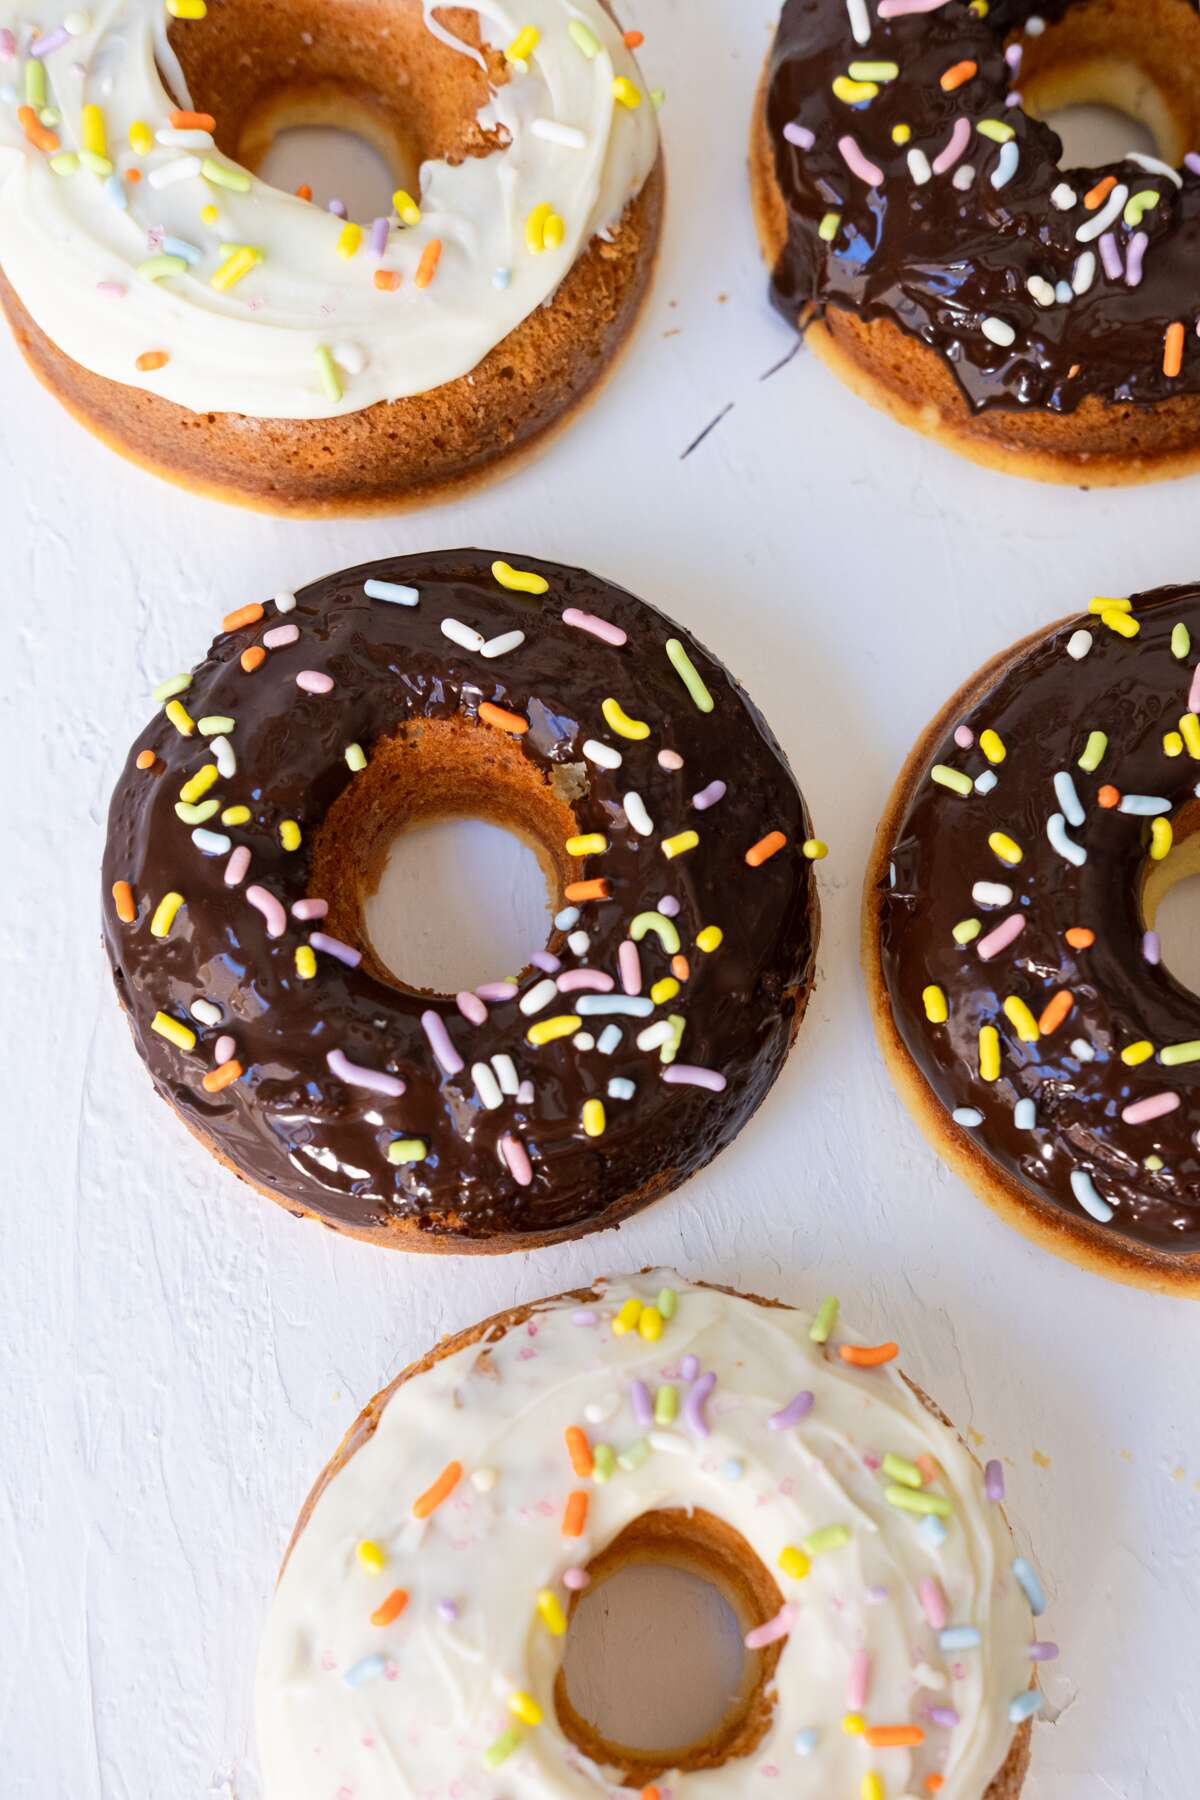 White and milk chocolate glazed baked donuts. 